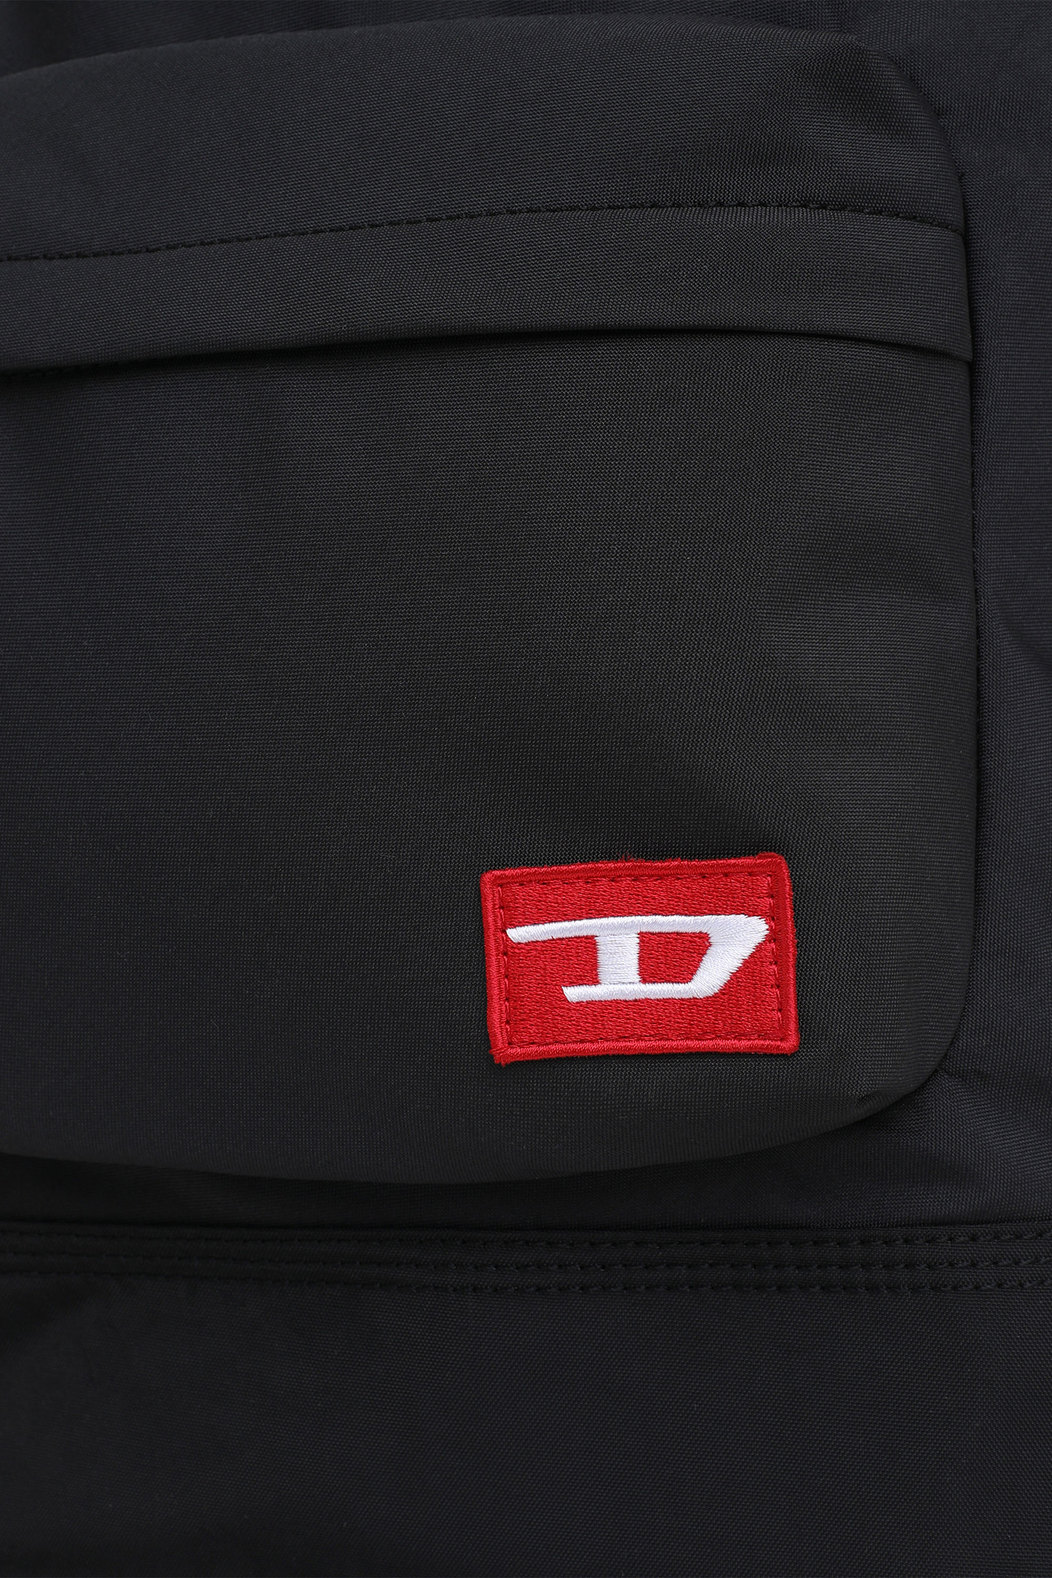 Backpack With D Patch